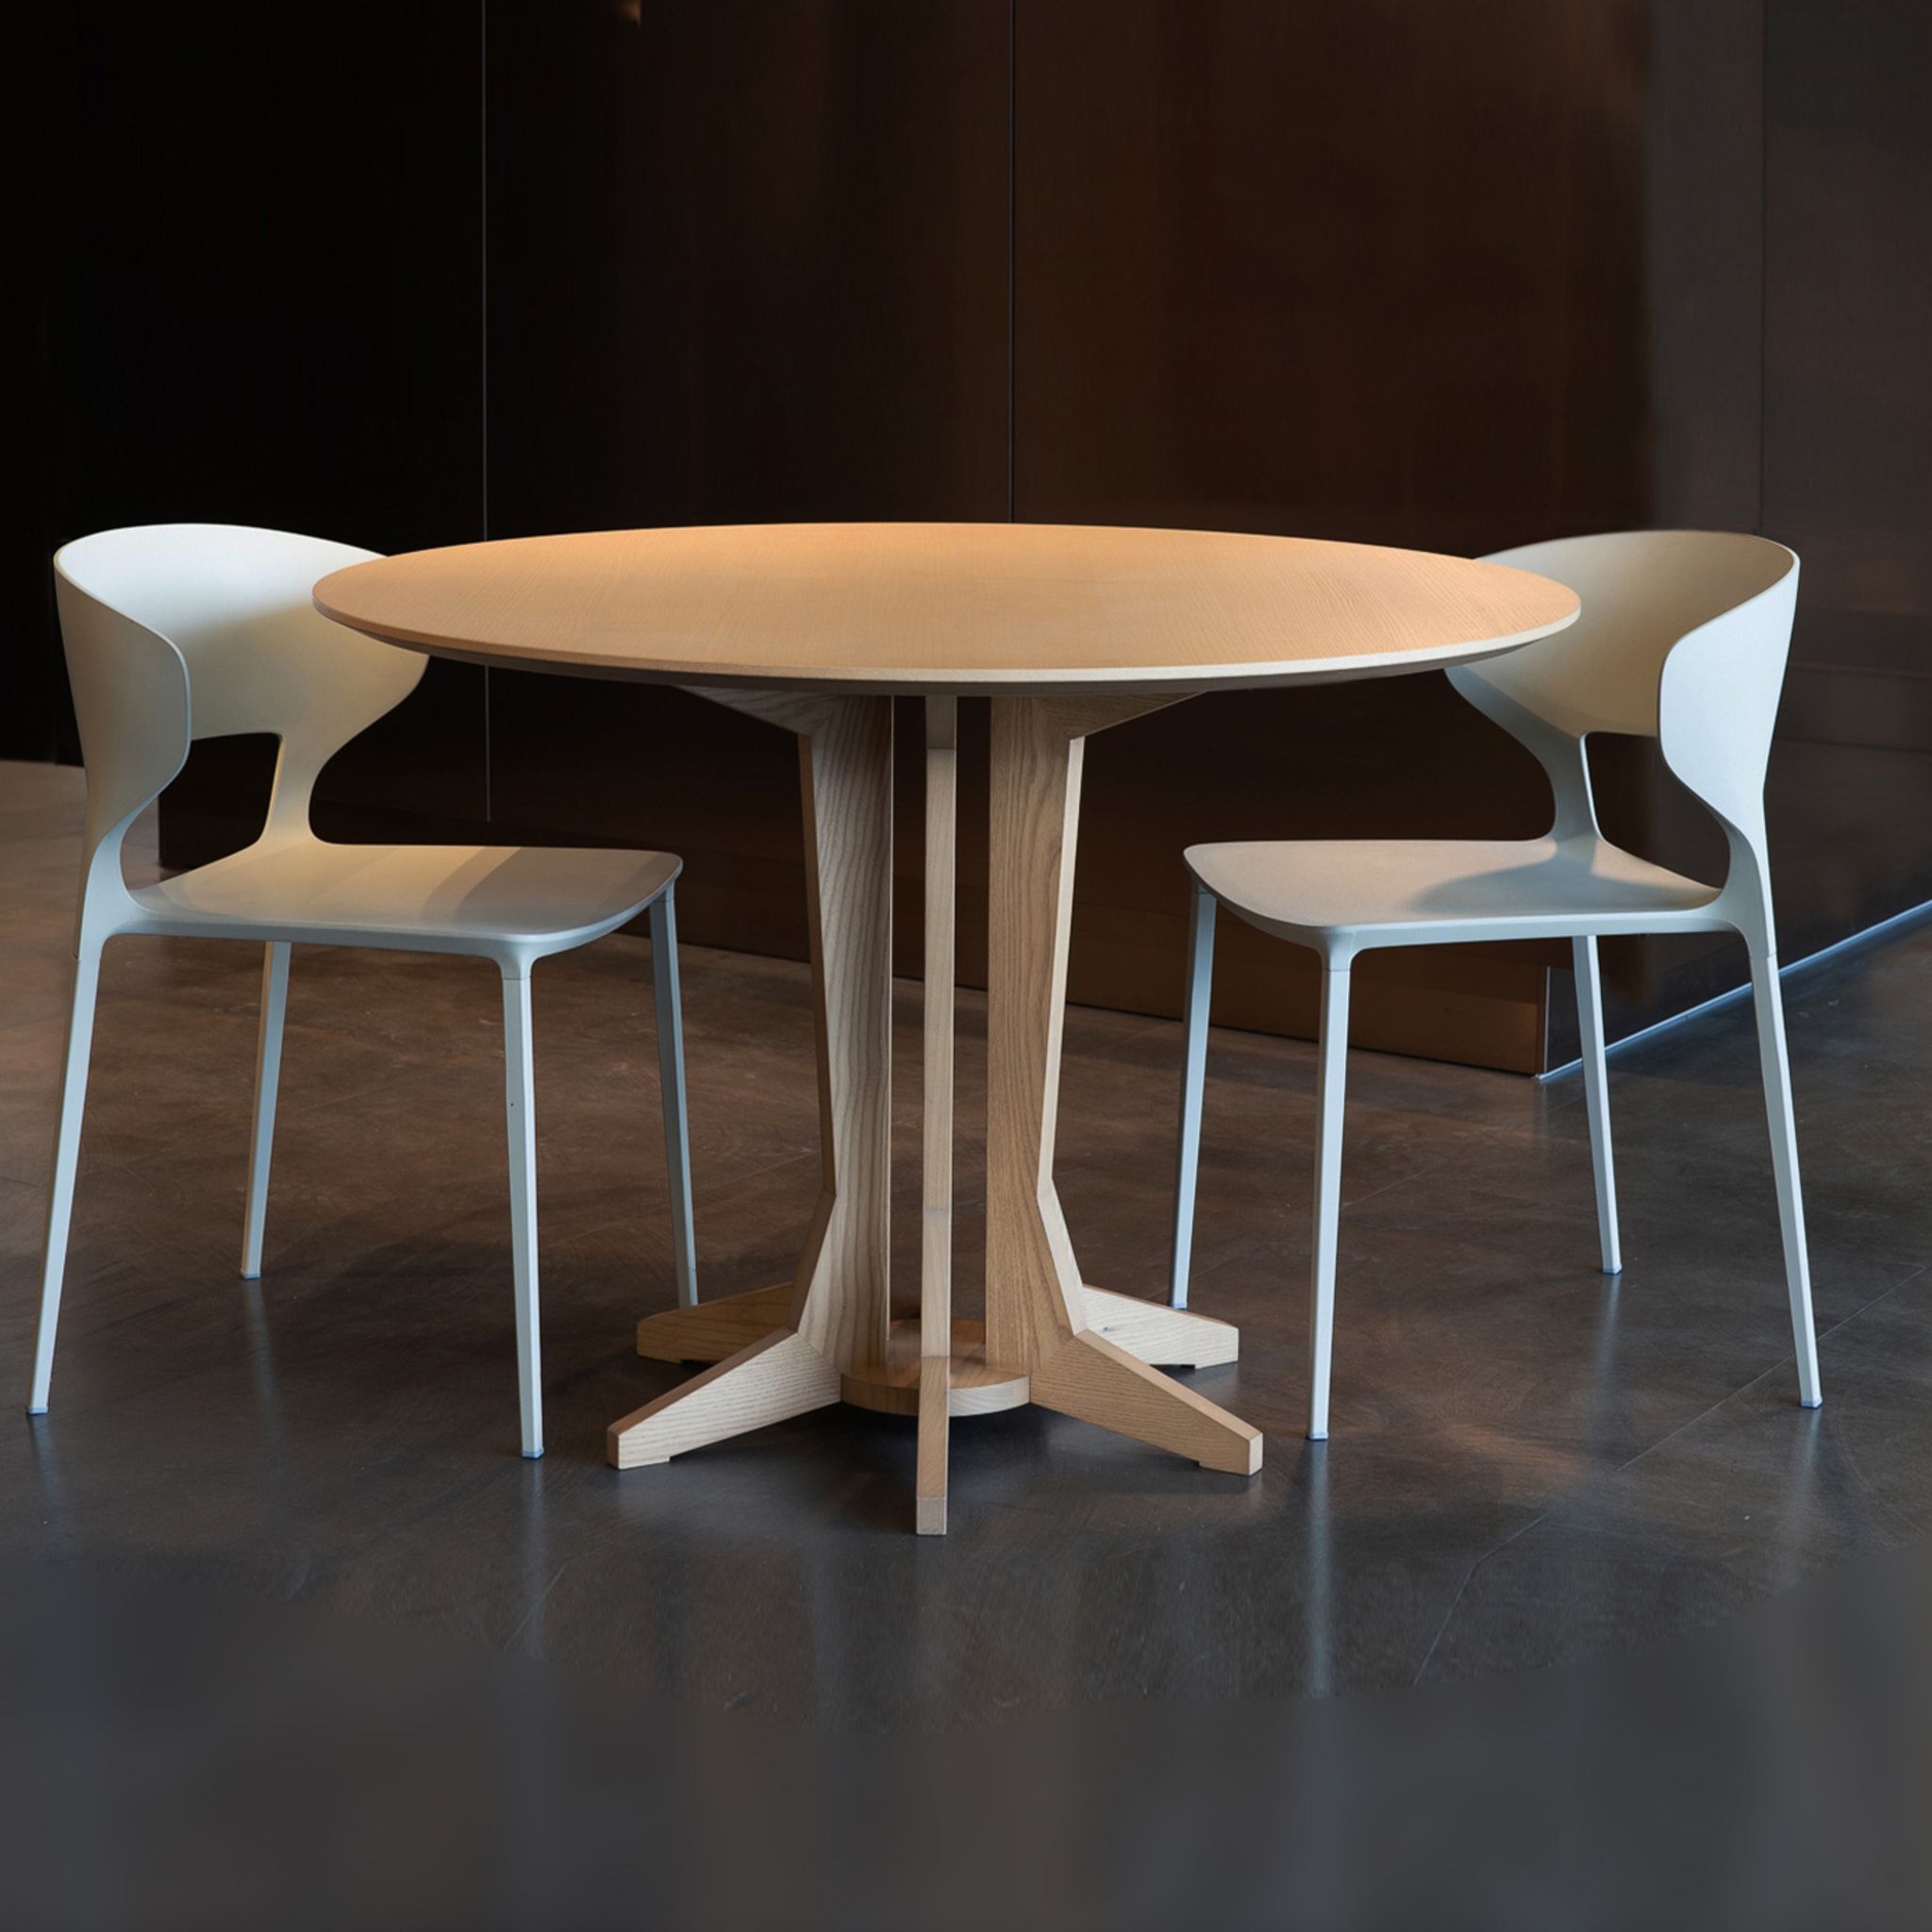 BADANO 1954 round dining table by Franco Albini - Alternative view 2